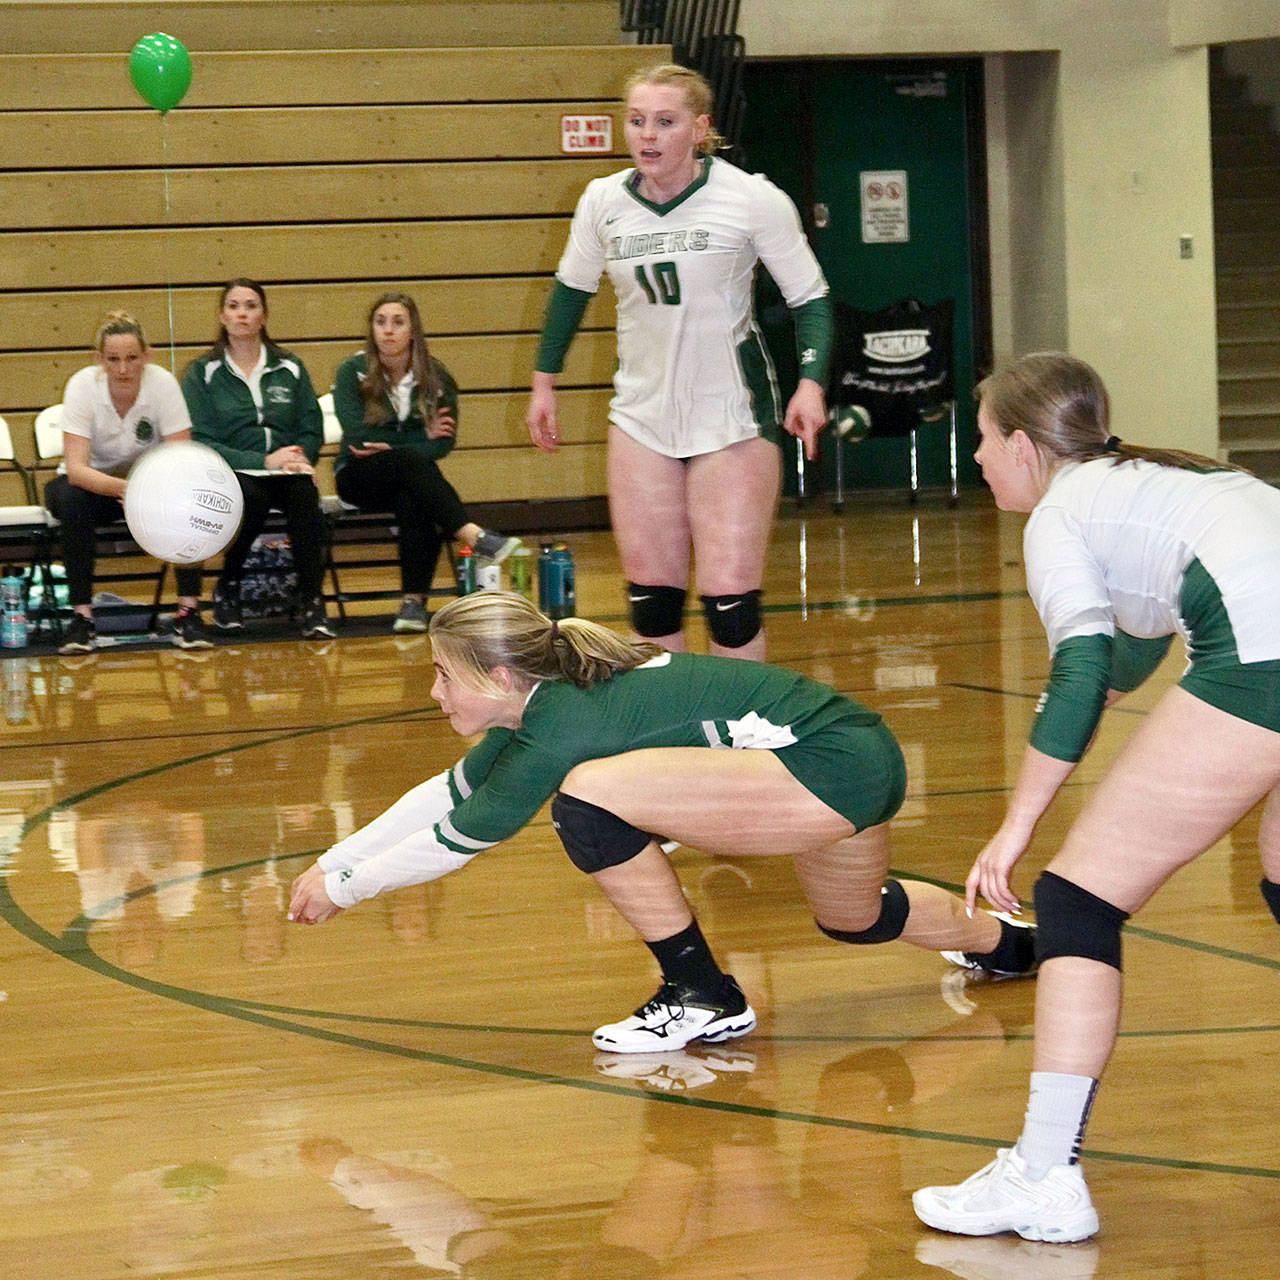 Port Angeles libero Lily Halberg digs a ball out against Olympic on Monday. The Riders took the Trojans to five games, but lost a close one as they prepare for the postseason. Teammate Kenndy Bruch (10) is in on the play. (Dave Logan/for Peninsula Daily News)